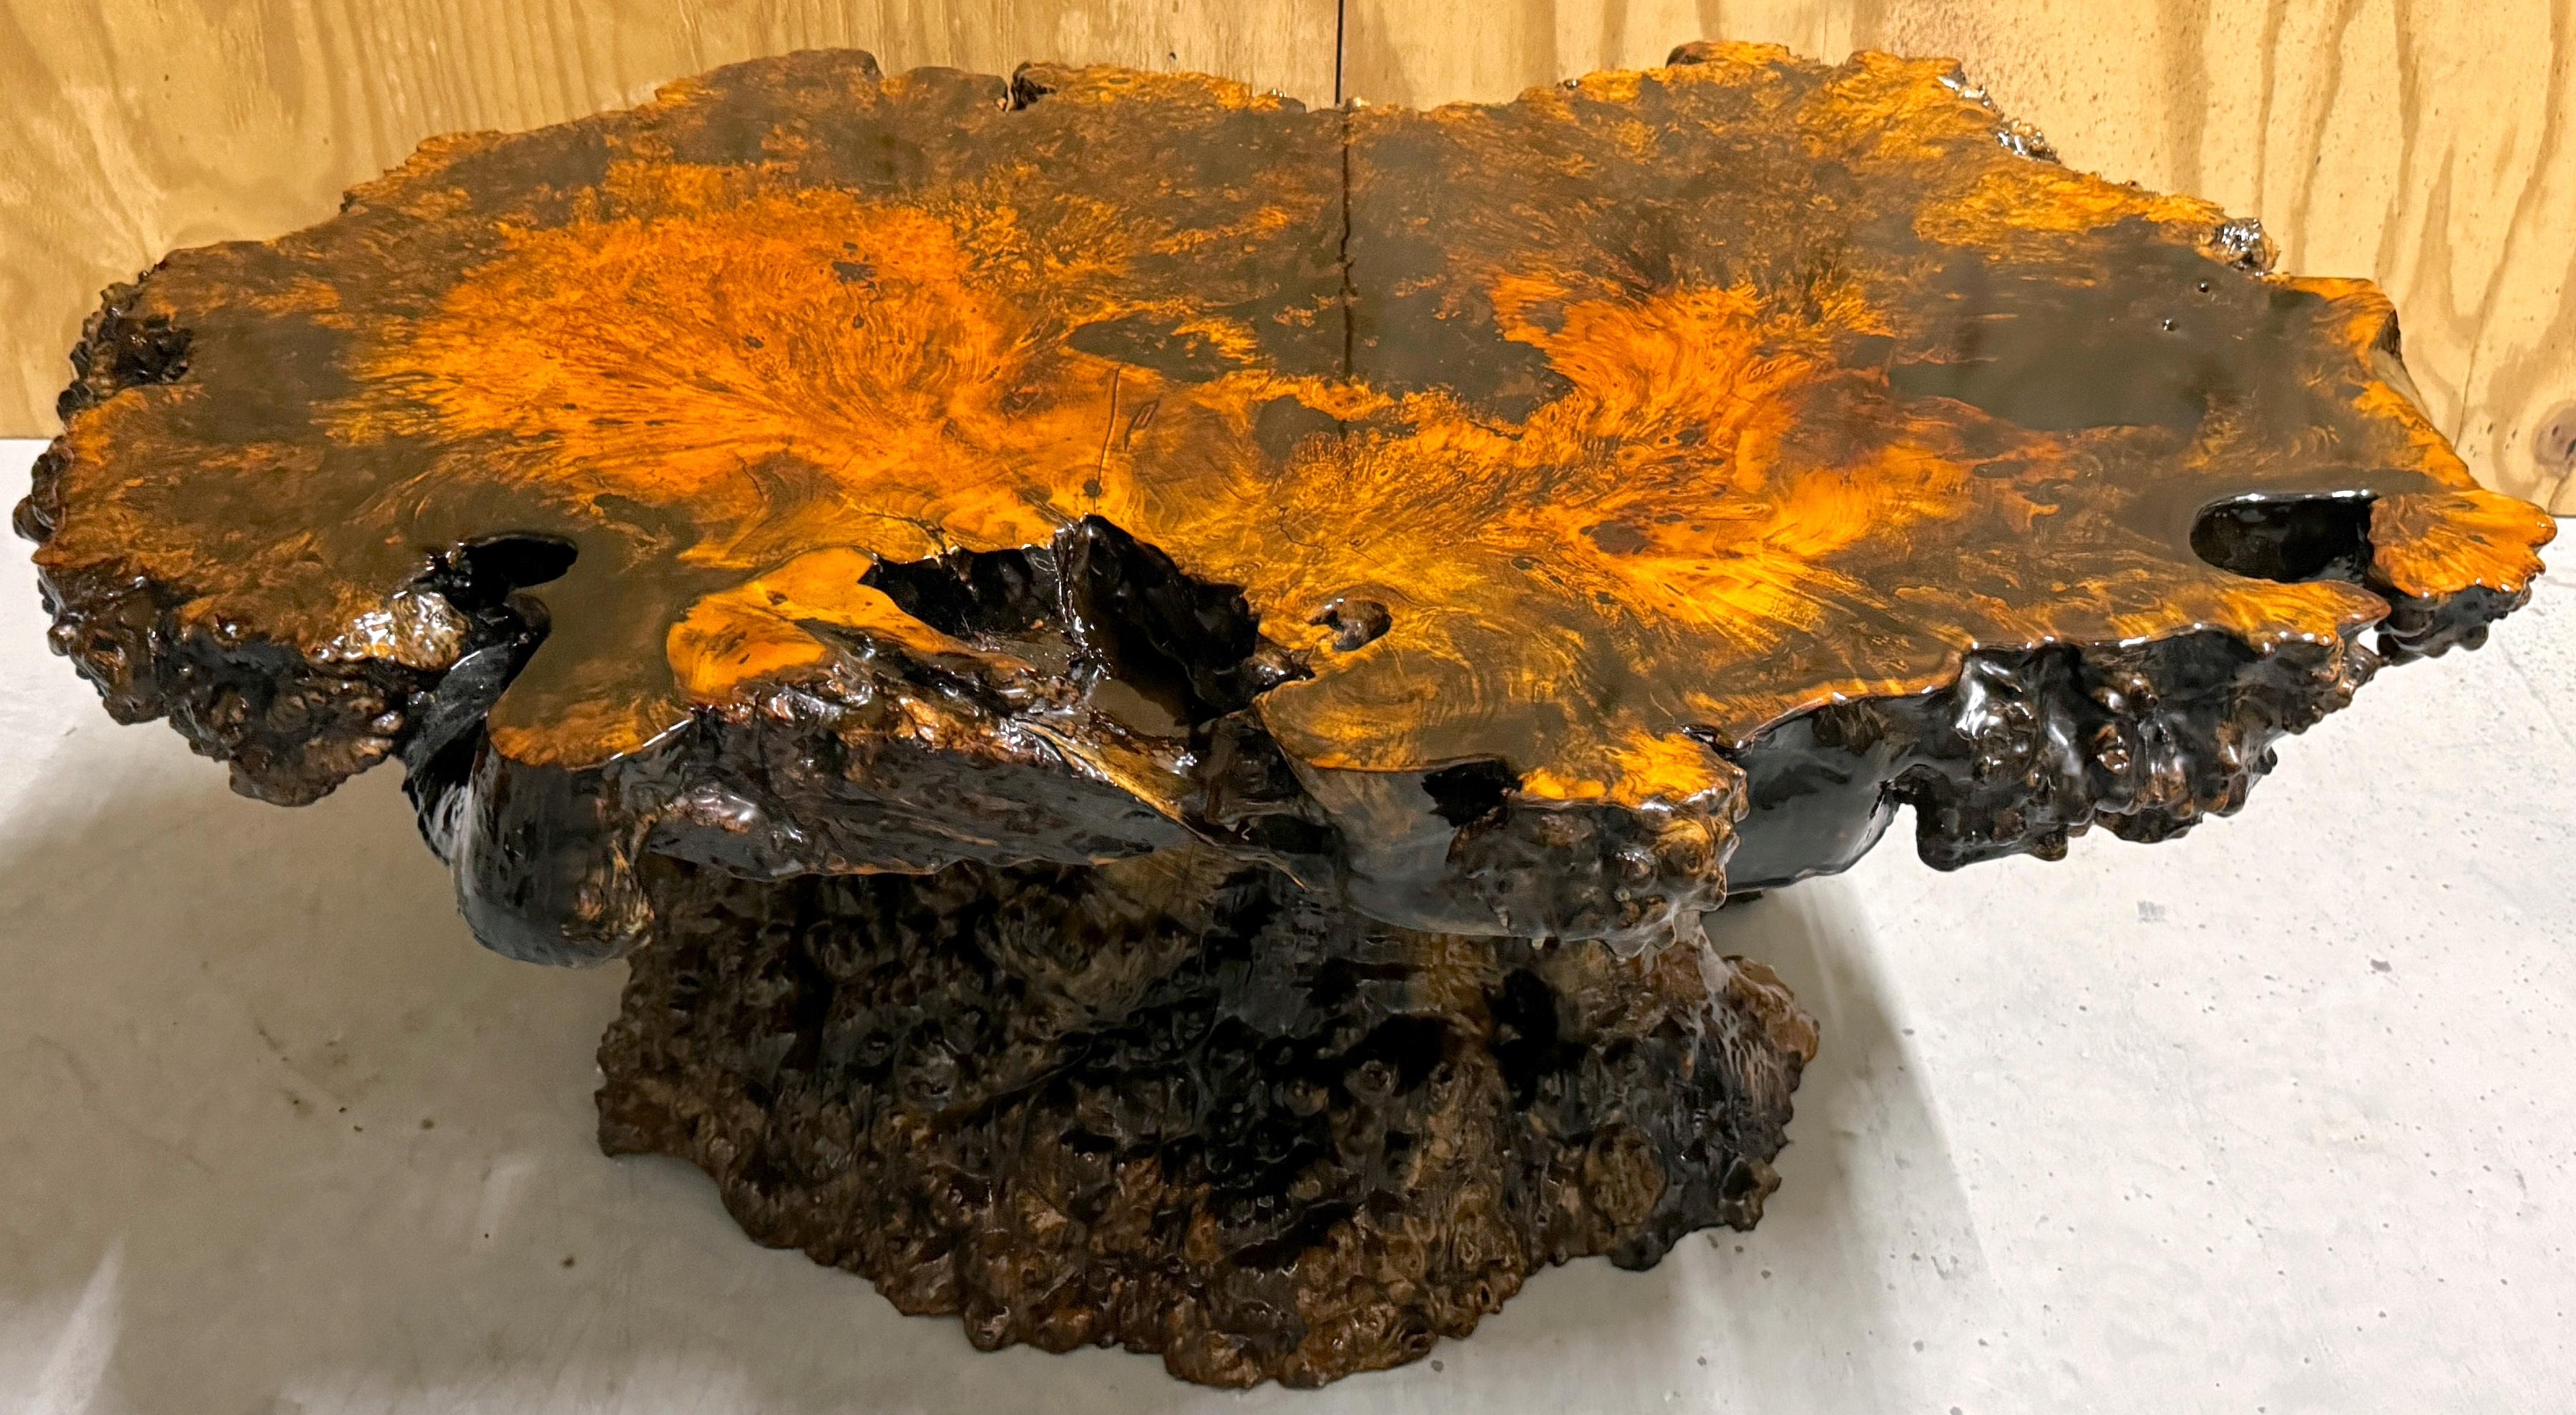 American Lacquered Live Edge Specimen Burl Coffee Table with Root Base 
USA, circa 1980s

Offering an exquisite piece of organic modern furniture, an American Lacquered Live Edge Specimen Burl Coffee Table with Root Base is a remarkable example of